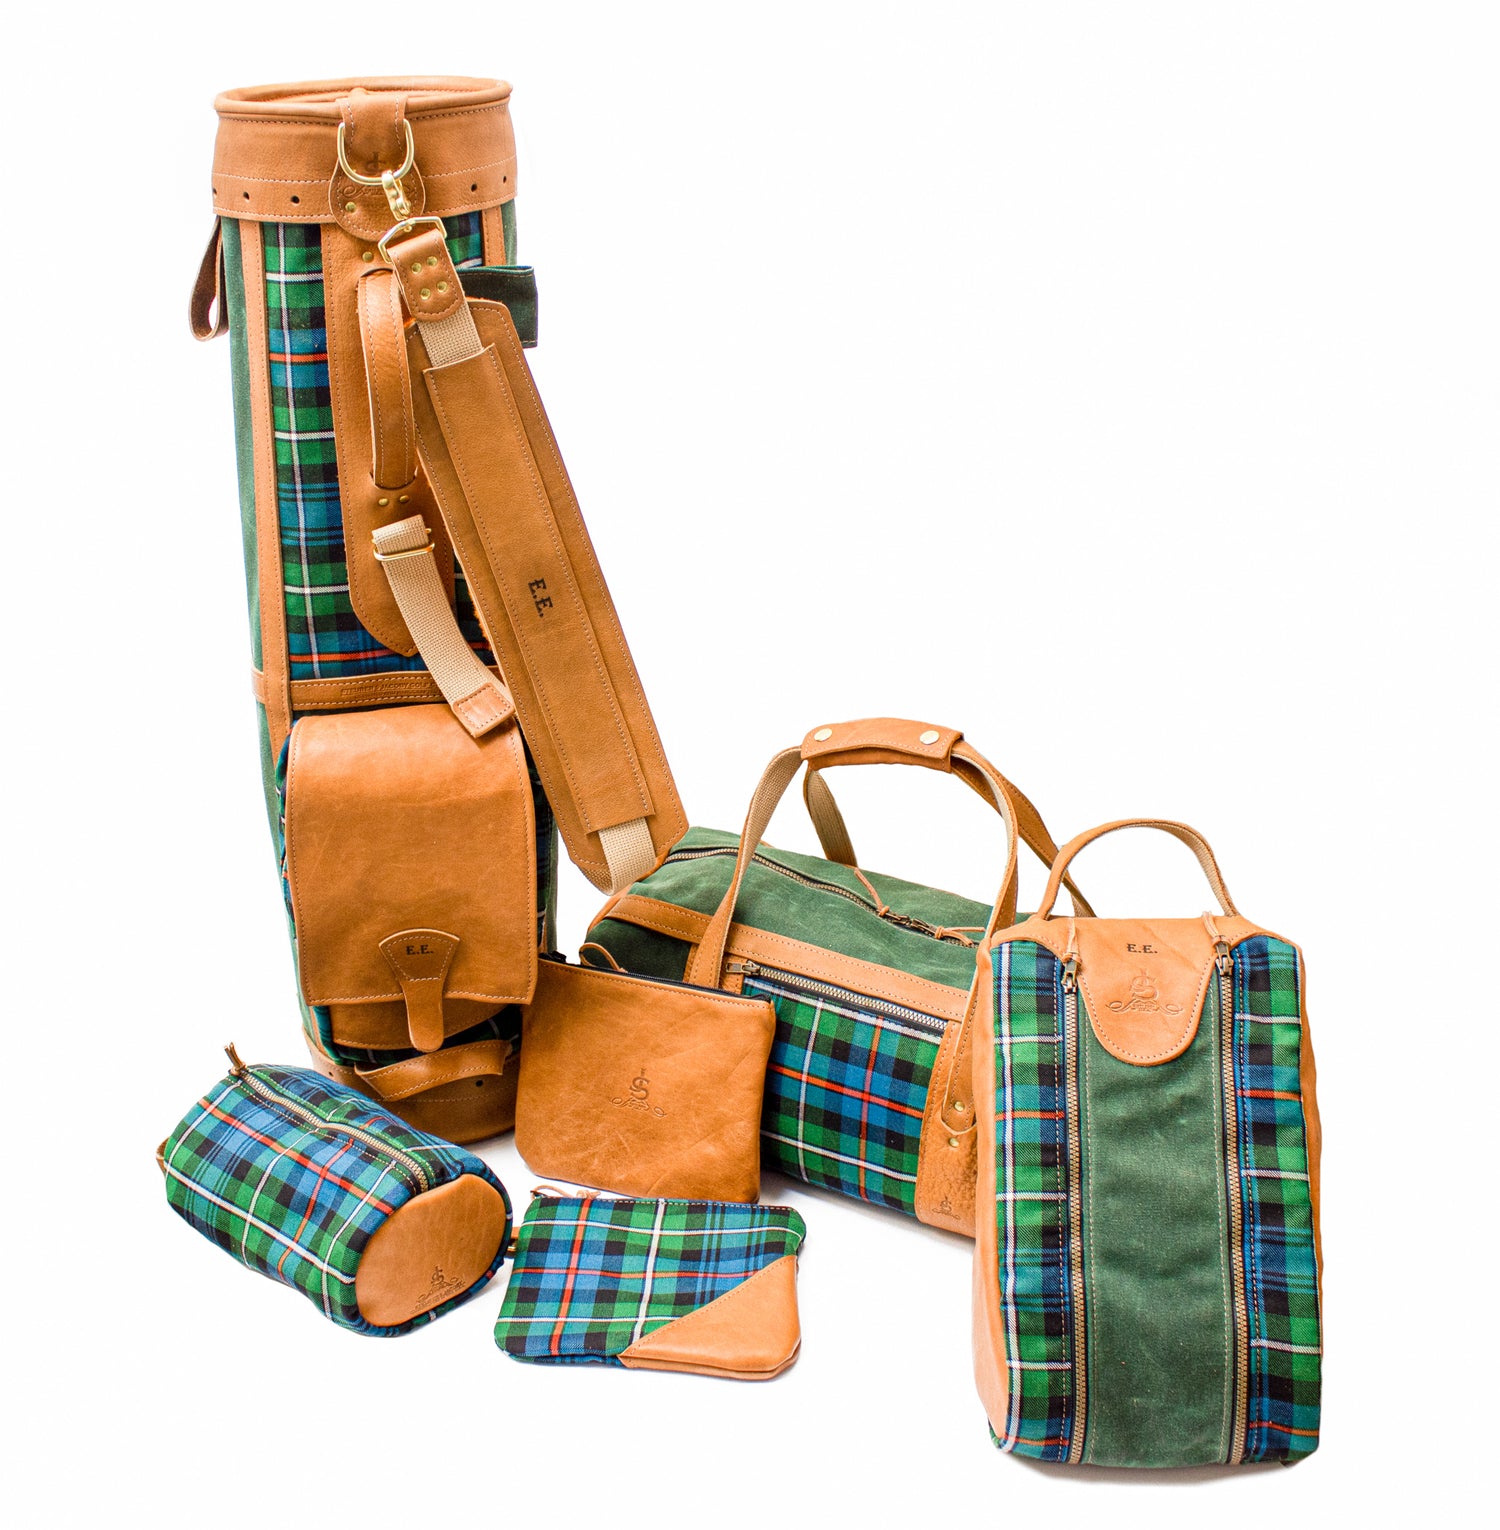 Leather and Tartan Golf Bag with Matching Accessories